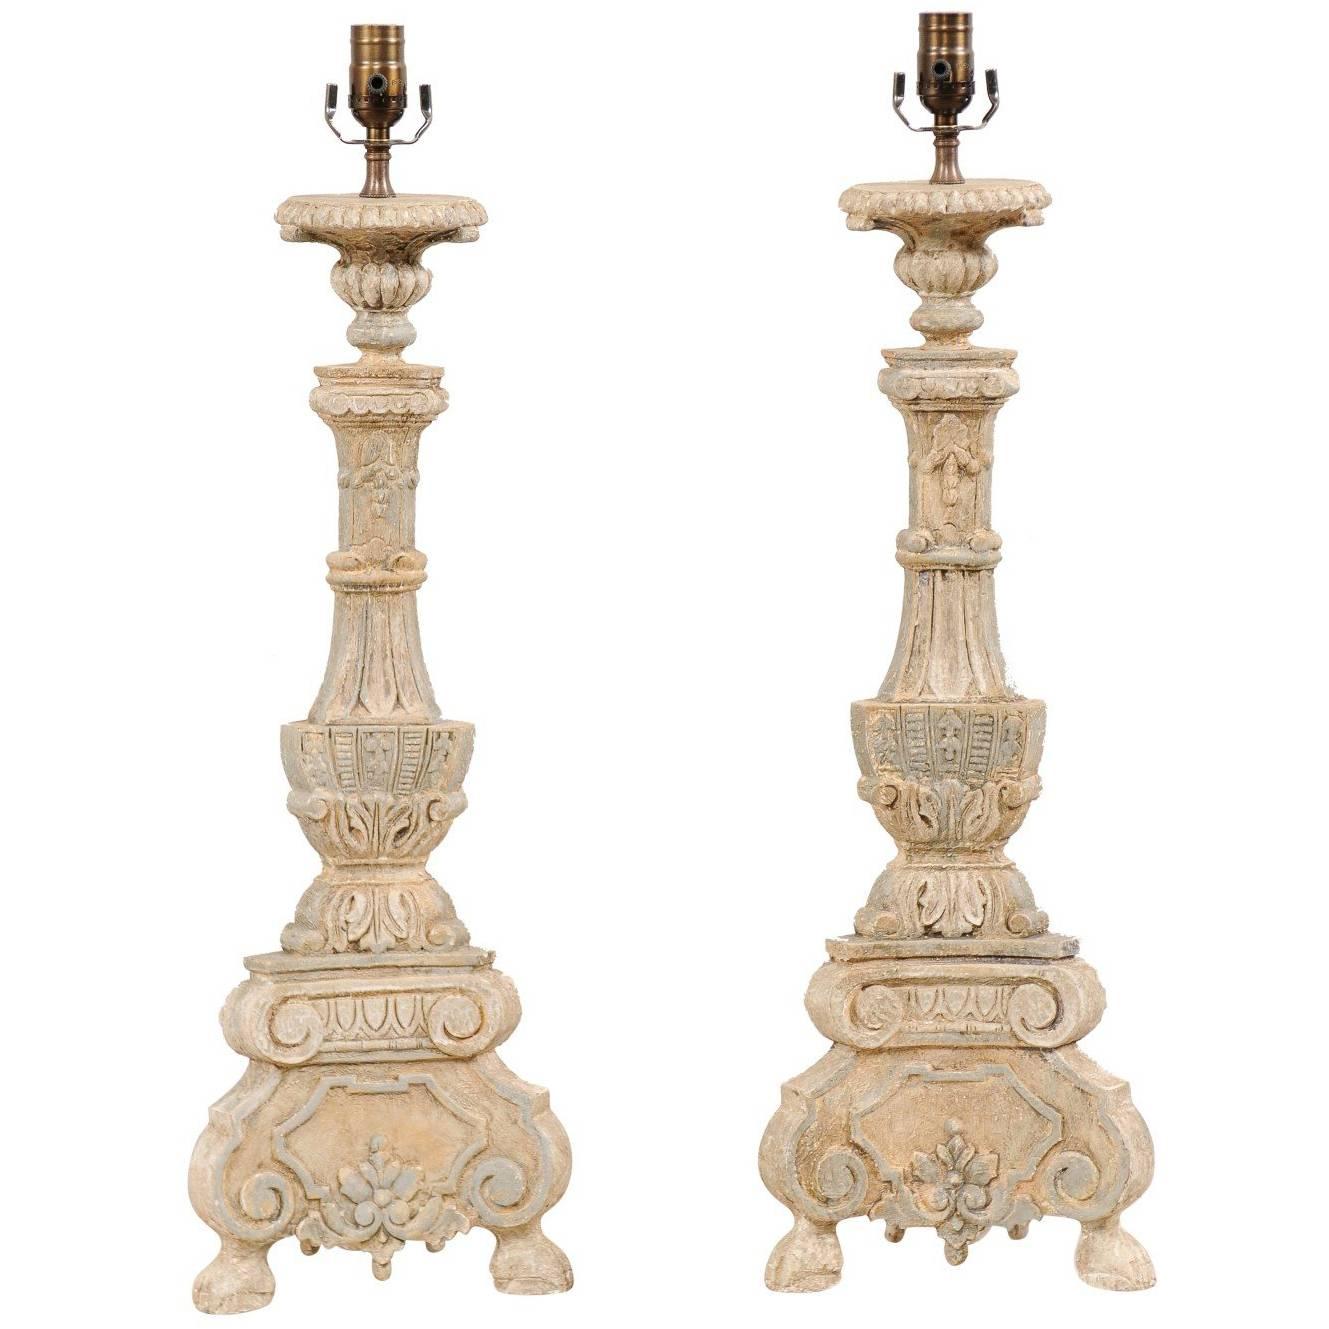 Pair of Italian Style Hand-Carved and Painted Tall Candlestick Table Lamps